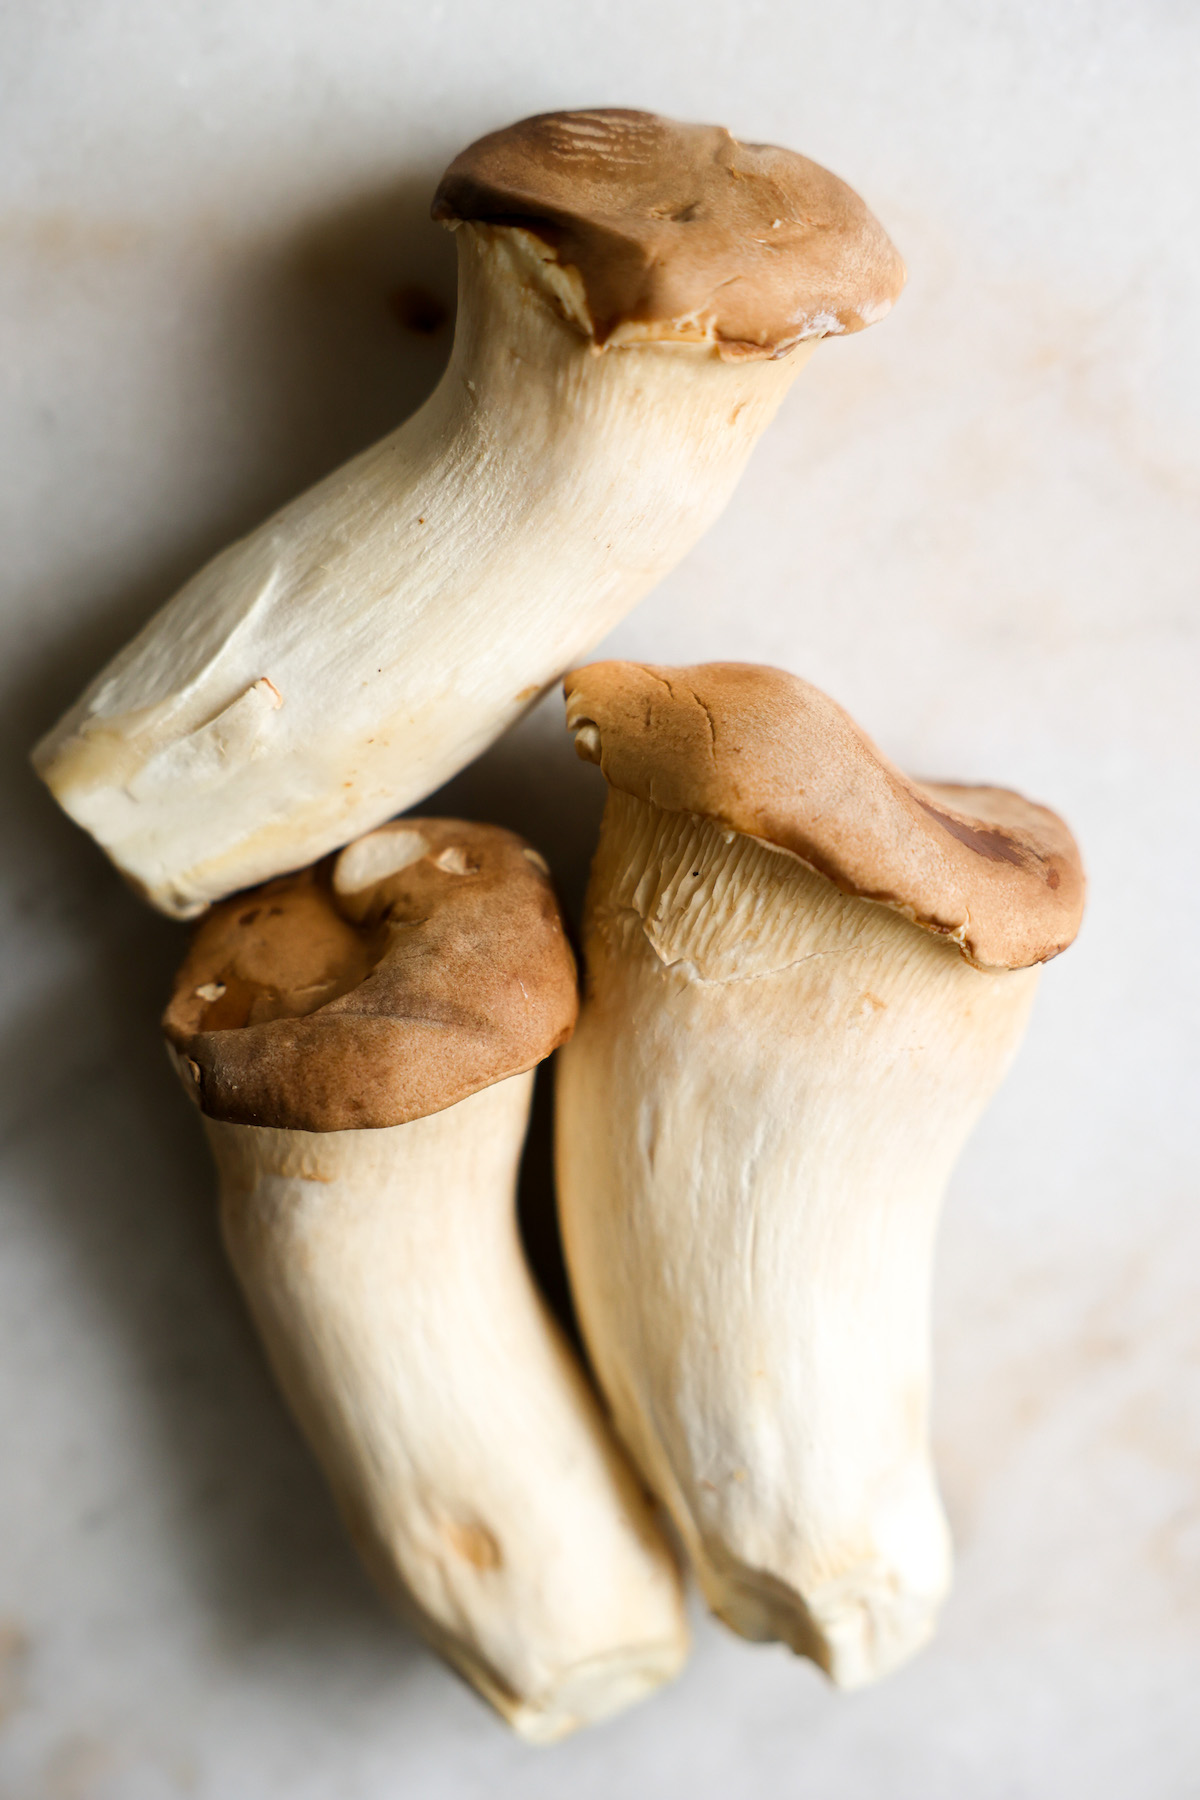 Three large king oyster mushrooms on the counter.